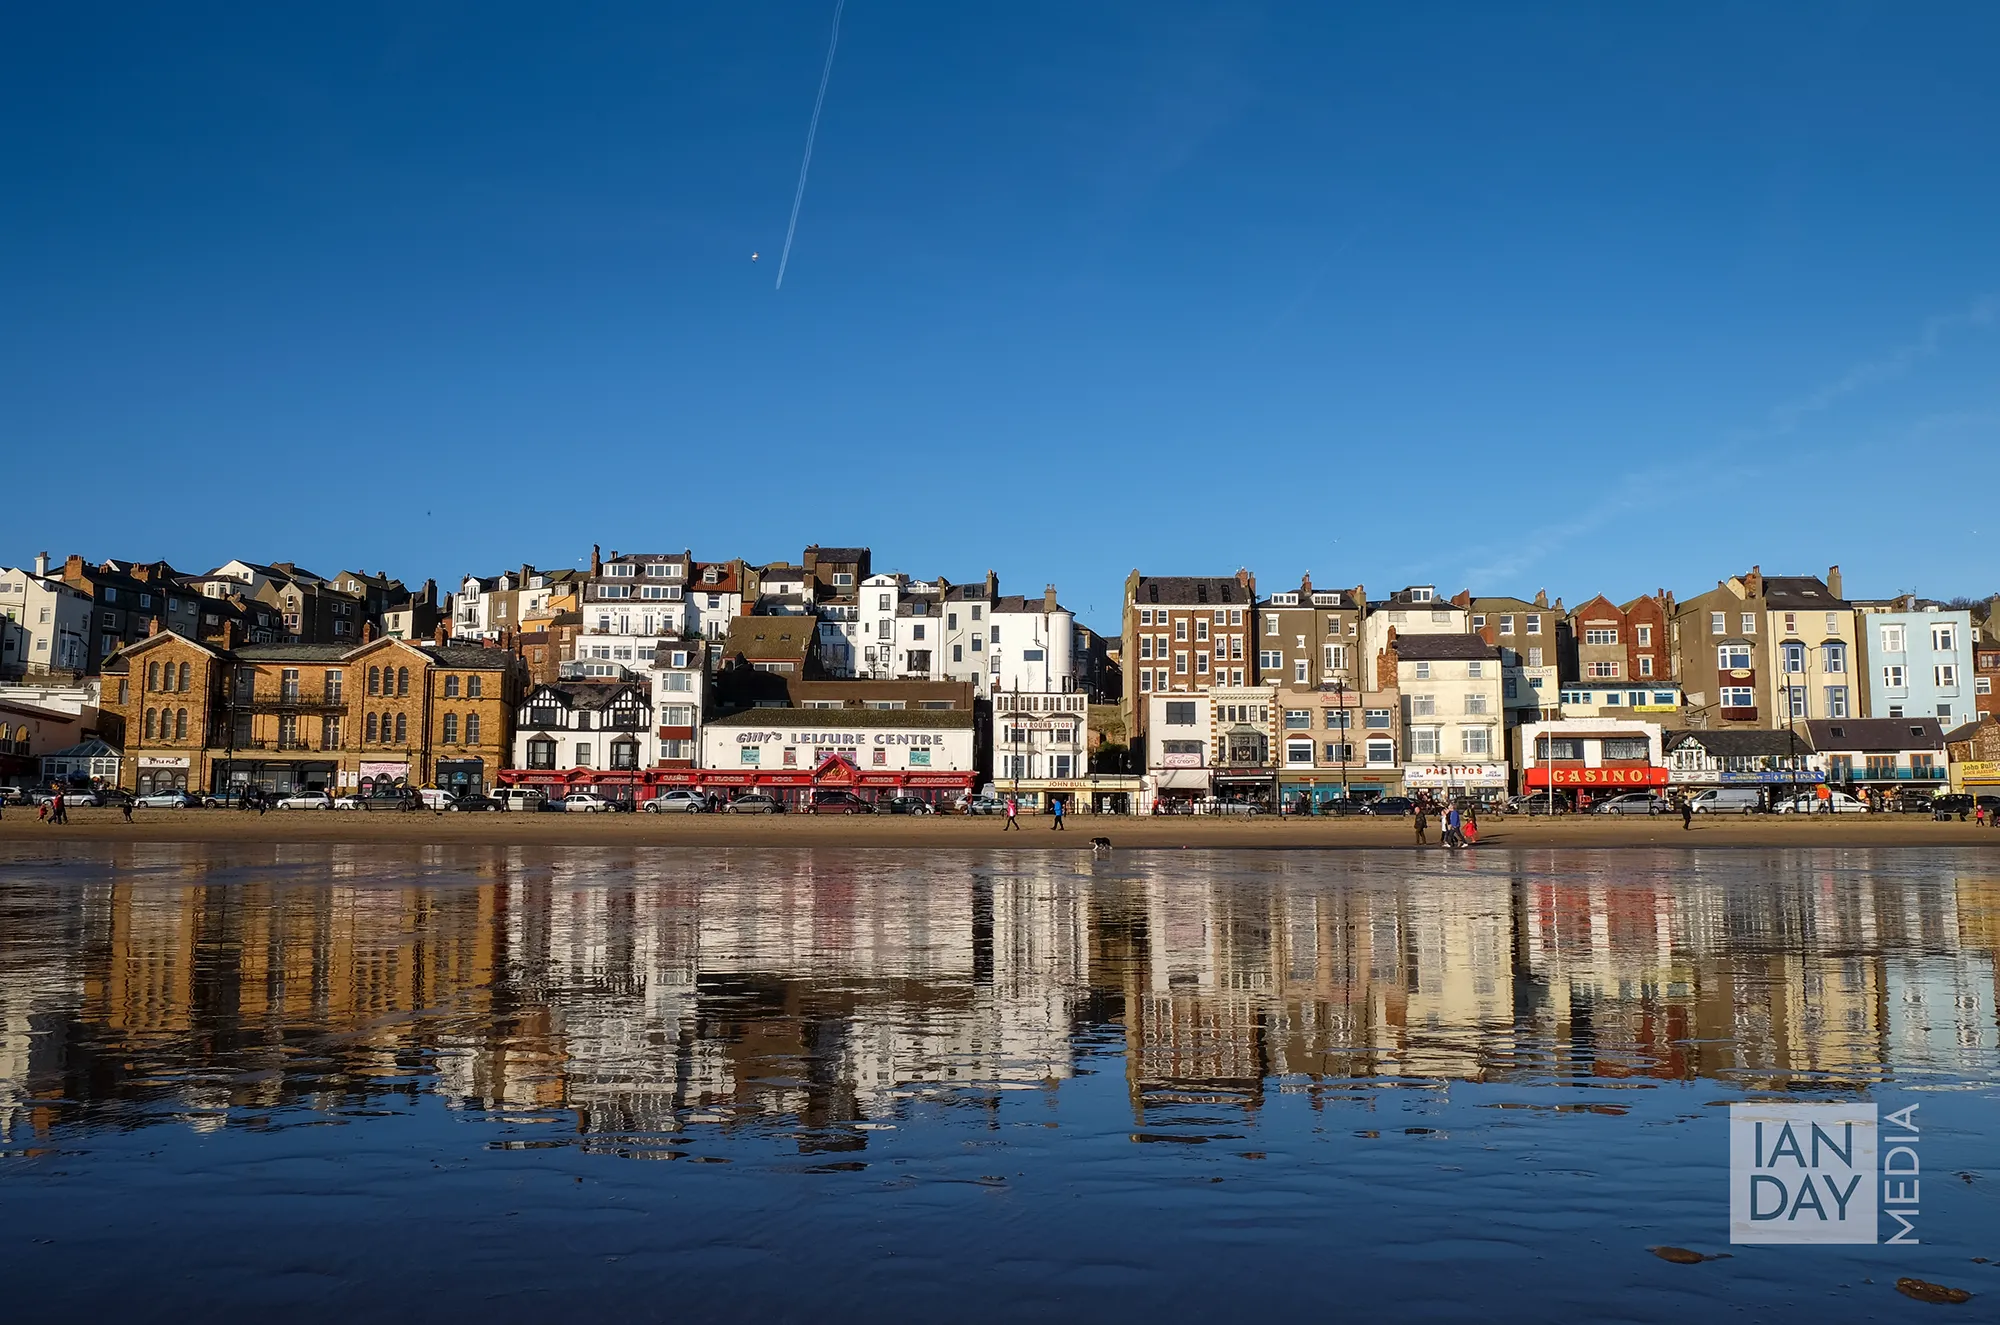 Scarborough seafront, North Yorkshire. Ian Day Media - Photography, Editing & Training.